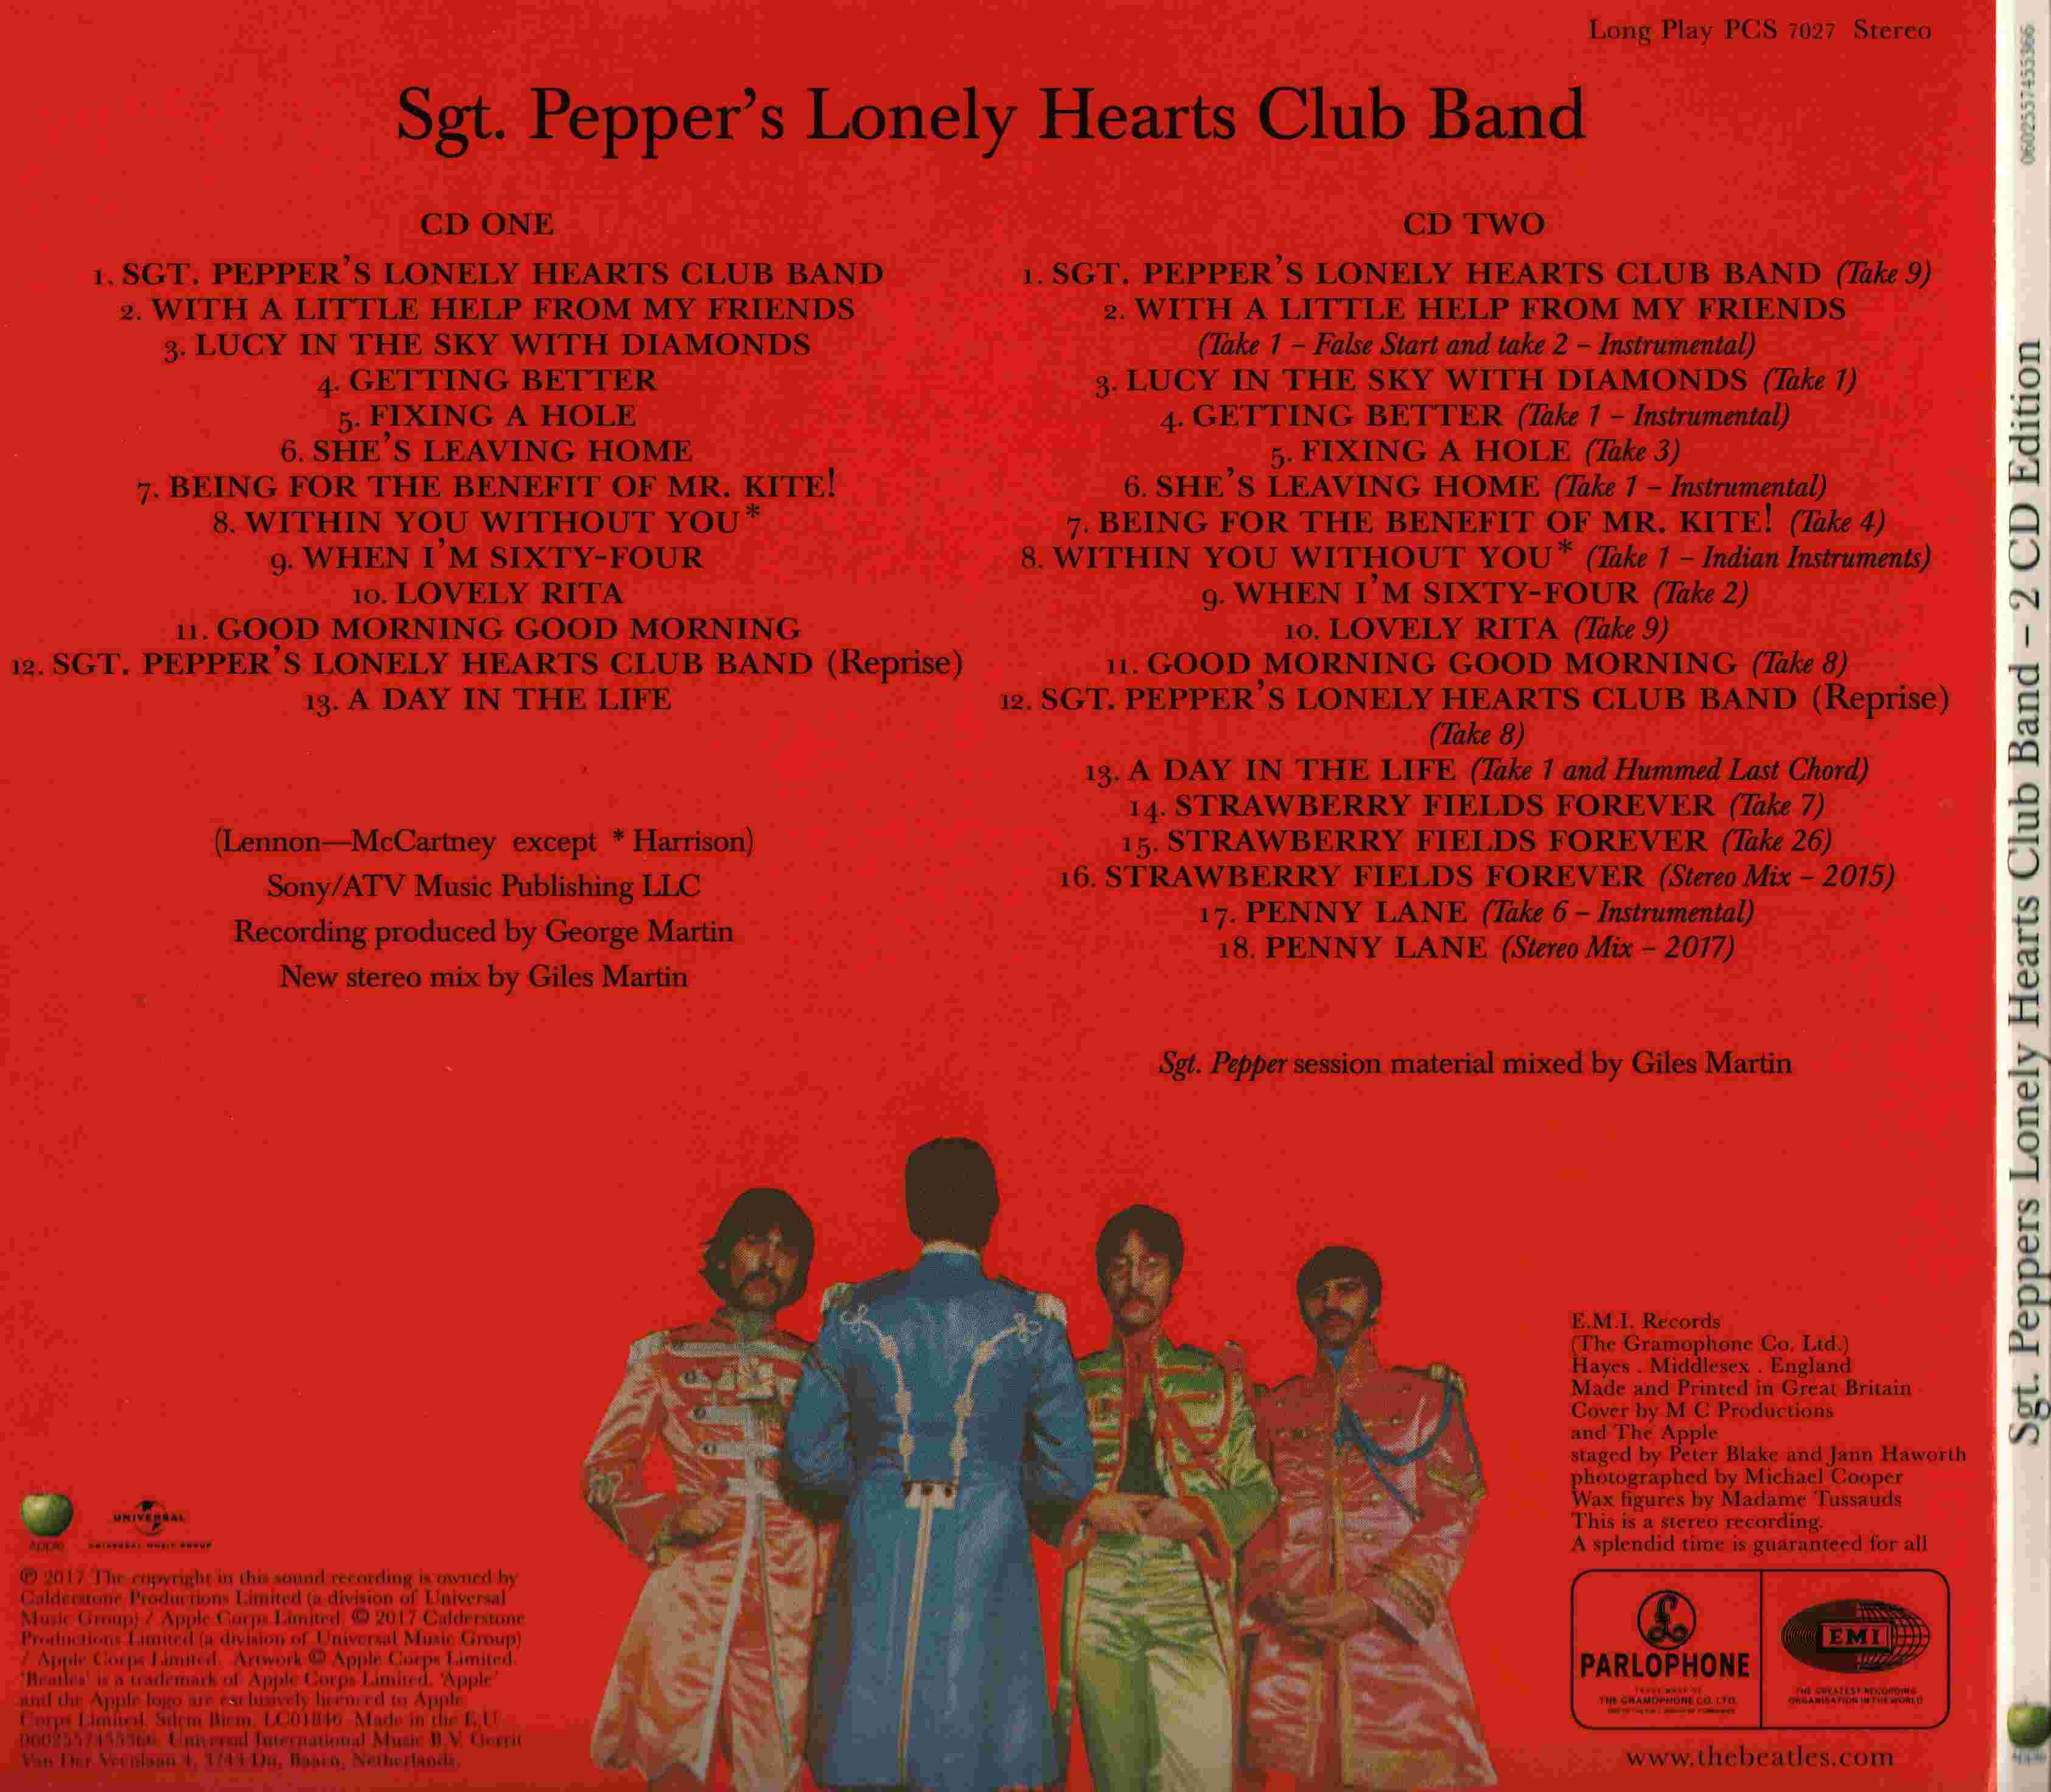 Beatles sgt peppers lonely hearts club. Обложка альбома Битлз Sgt Pepper s Lonely Hearts Club Band. Sgt Pepper's Lonely Hearts Club Band обложка. Обложка Битлз сержант Пеппер. Beatles Sergeant Pepper's Lonely Hearts Club Band.